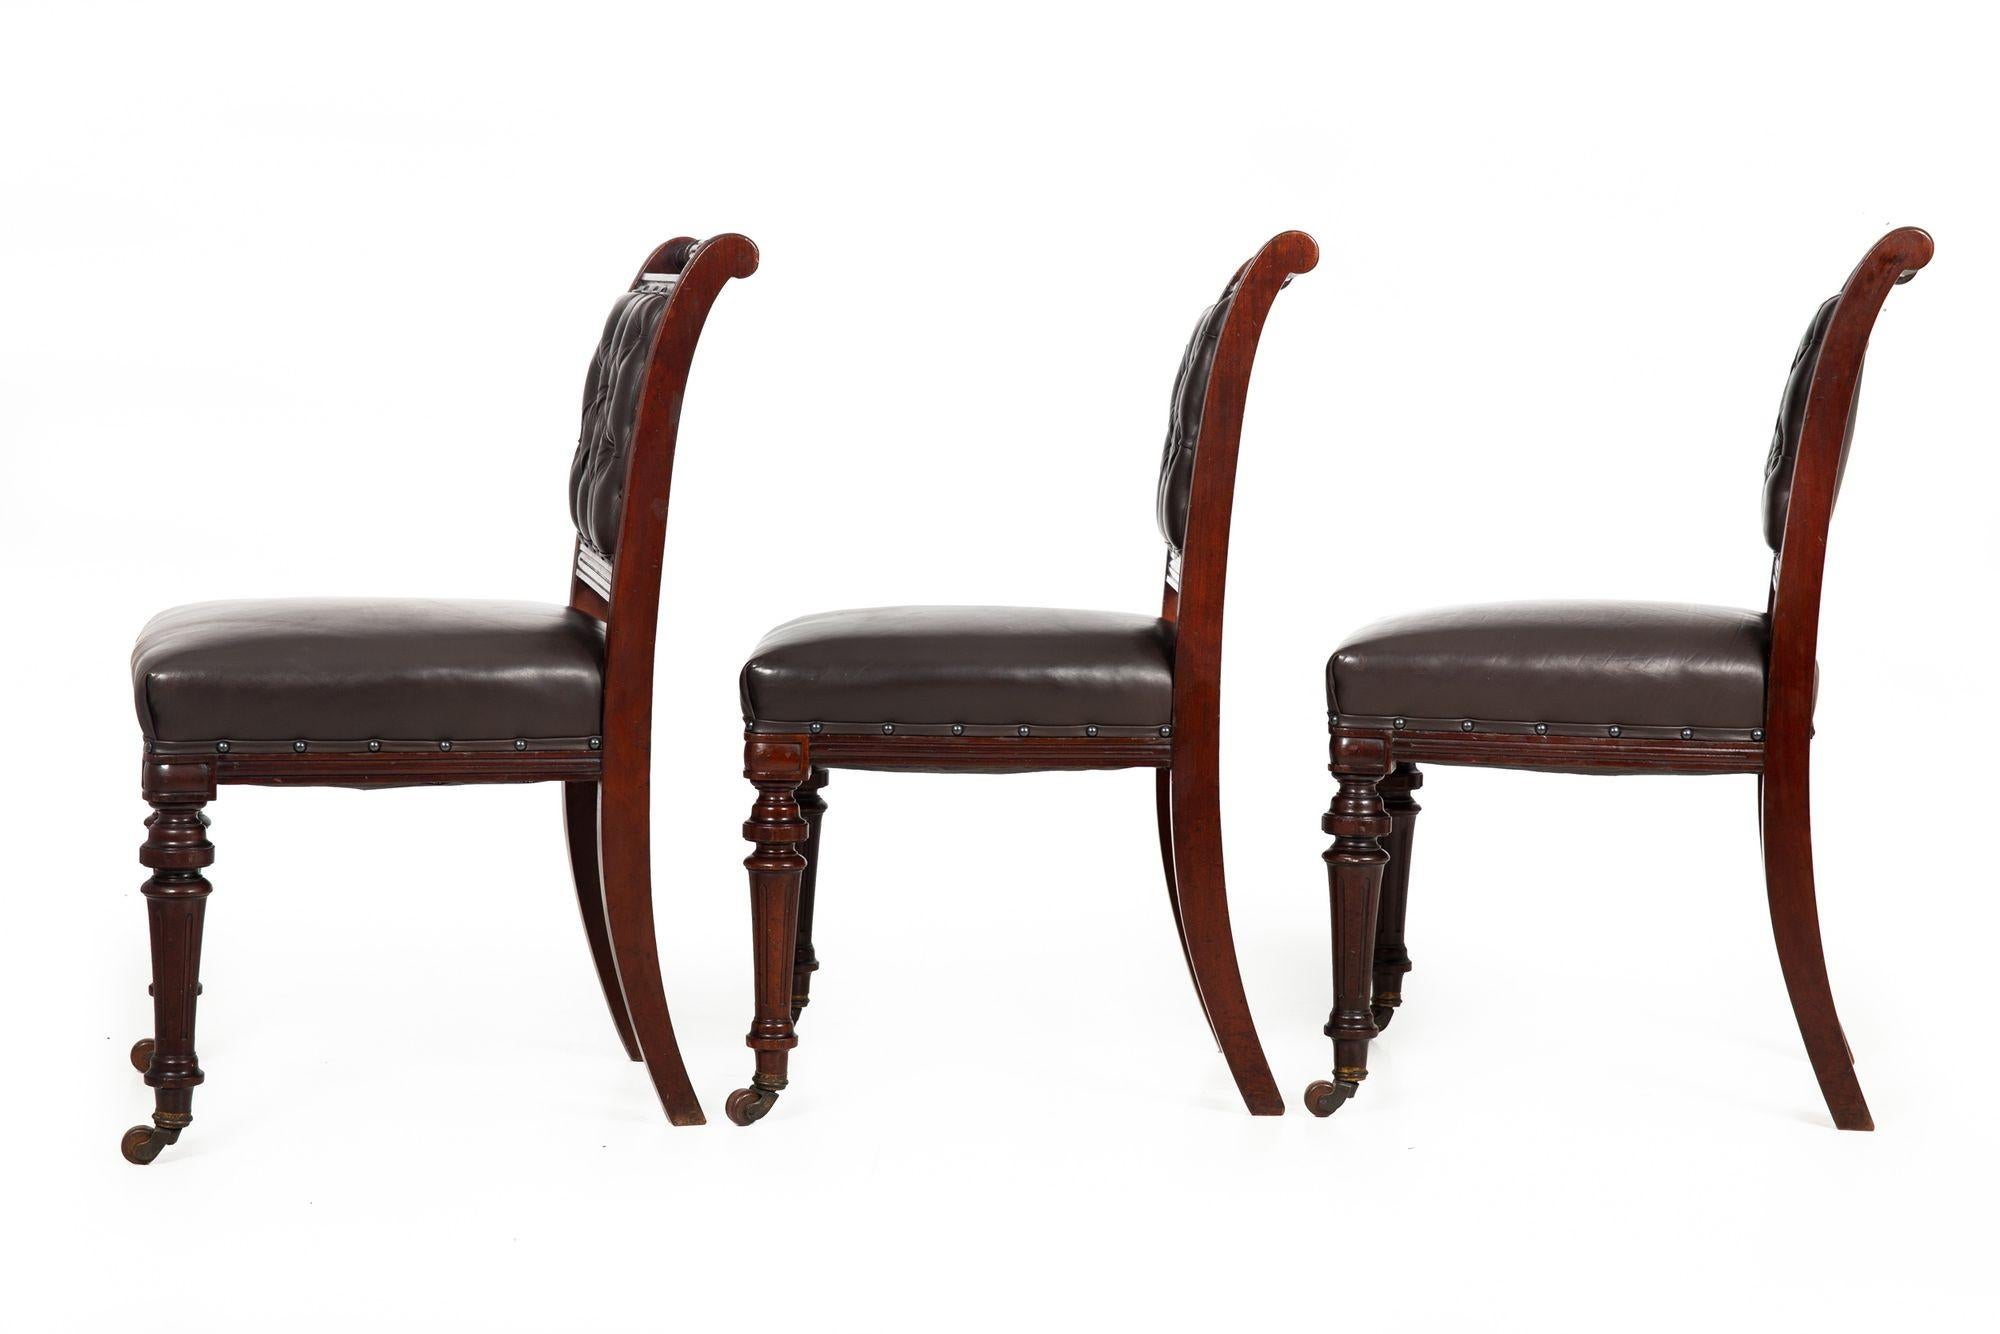 Set of 6 English Antique Mahogany and Leather Dining Chairs, 19th Century For Sale 3